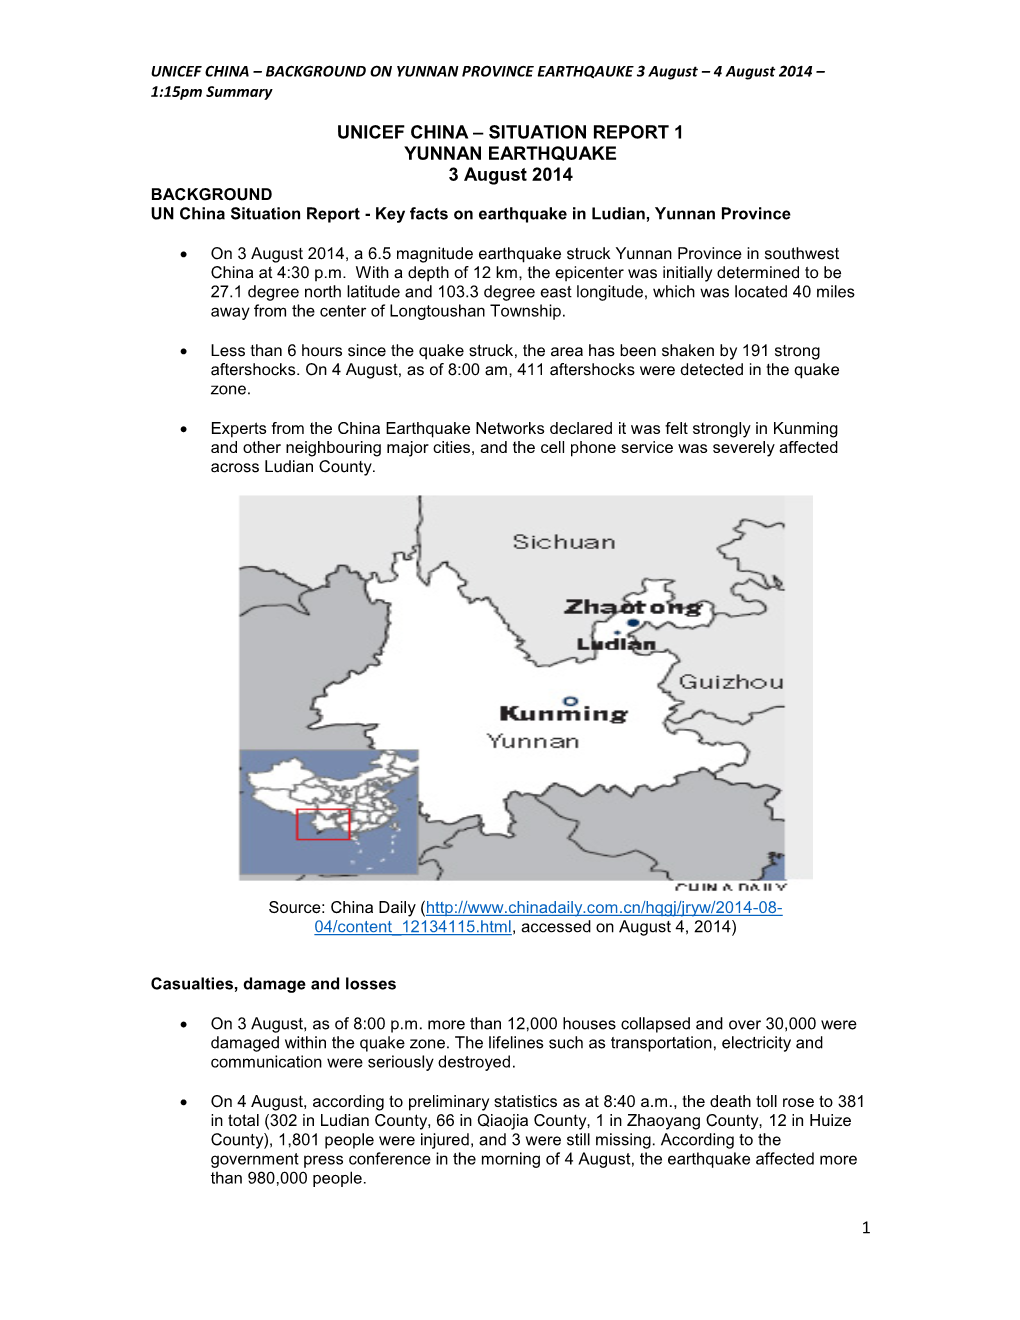 SITUATION REPORT 1 YUNNAN EARTHQUAKE 3 August 2014 BACKGROUND UN China Situation Report - Key Facts on Earthquake in Ludian, Yunnan Province